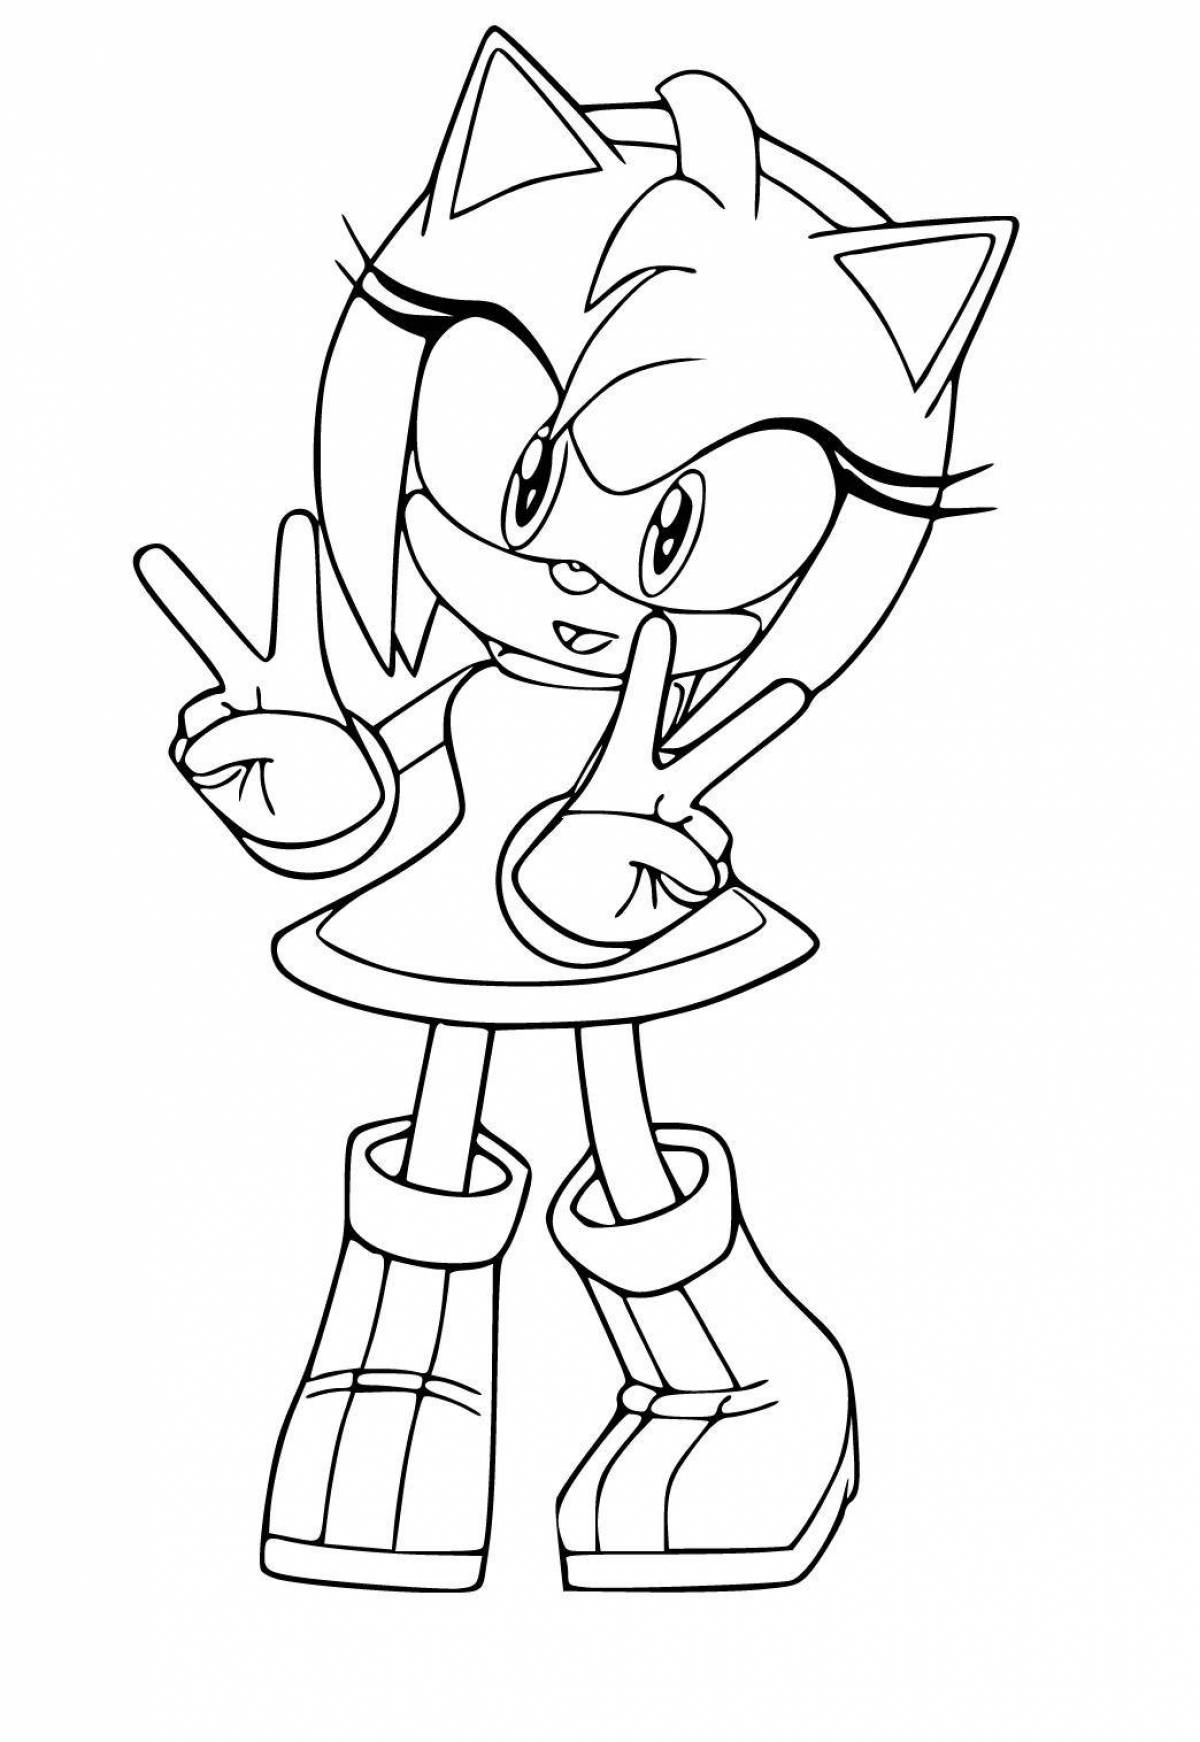 Sonic and amy rose amazing coloring book